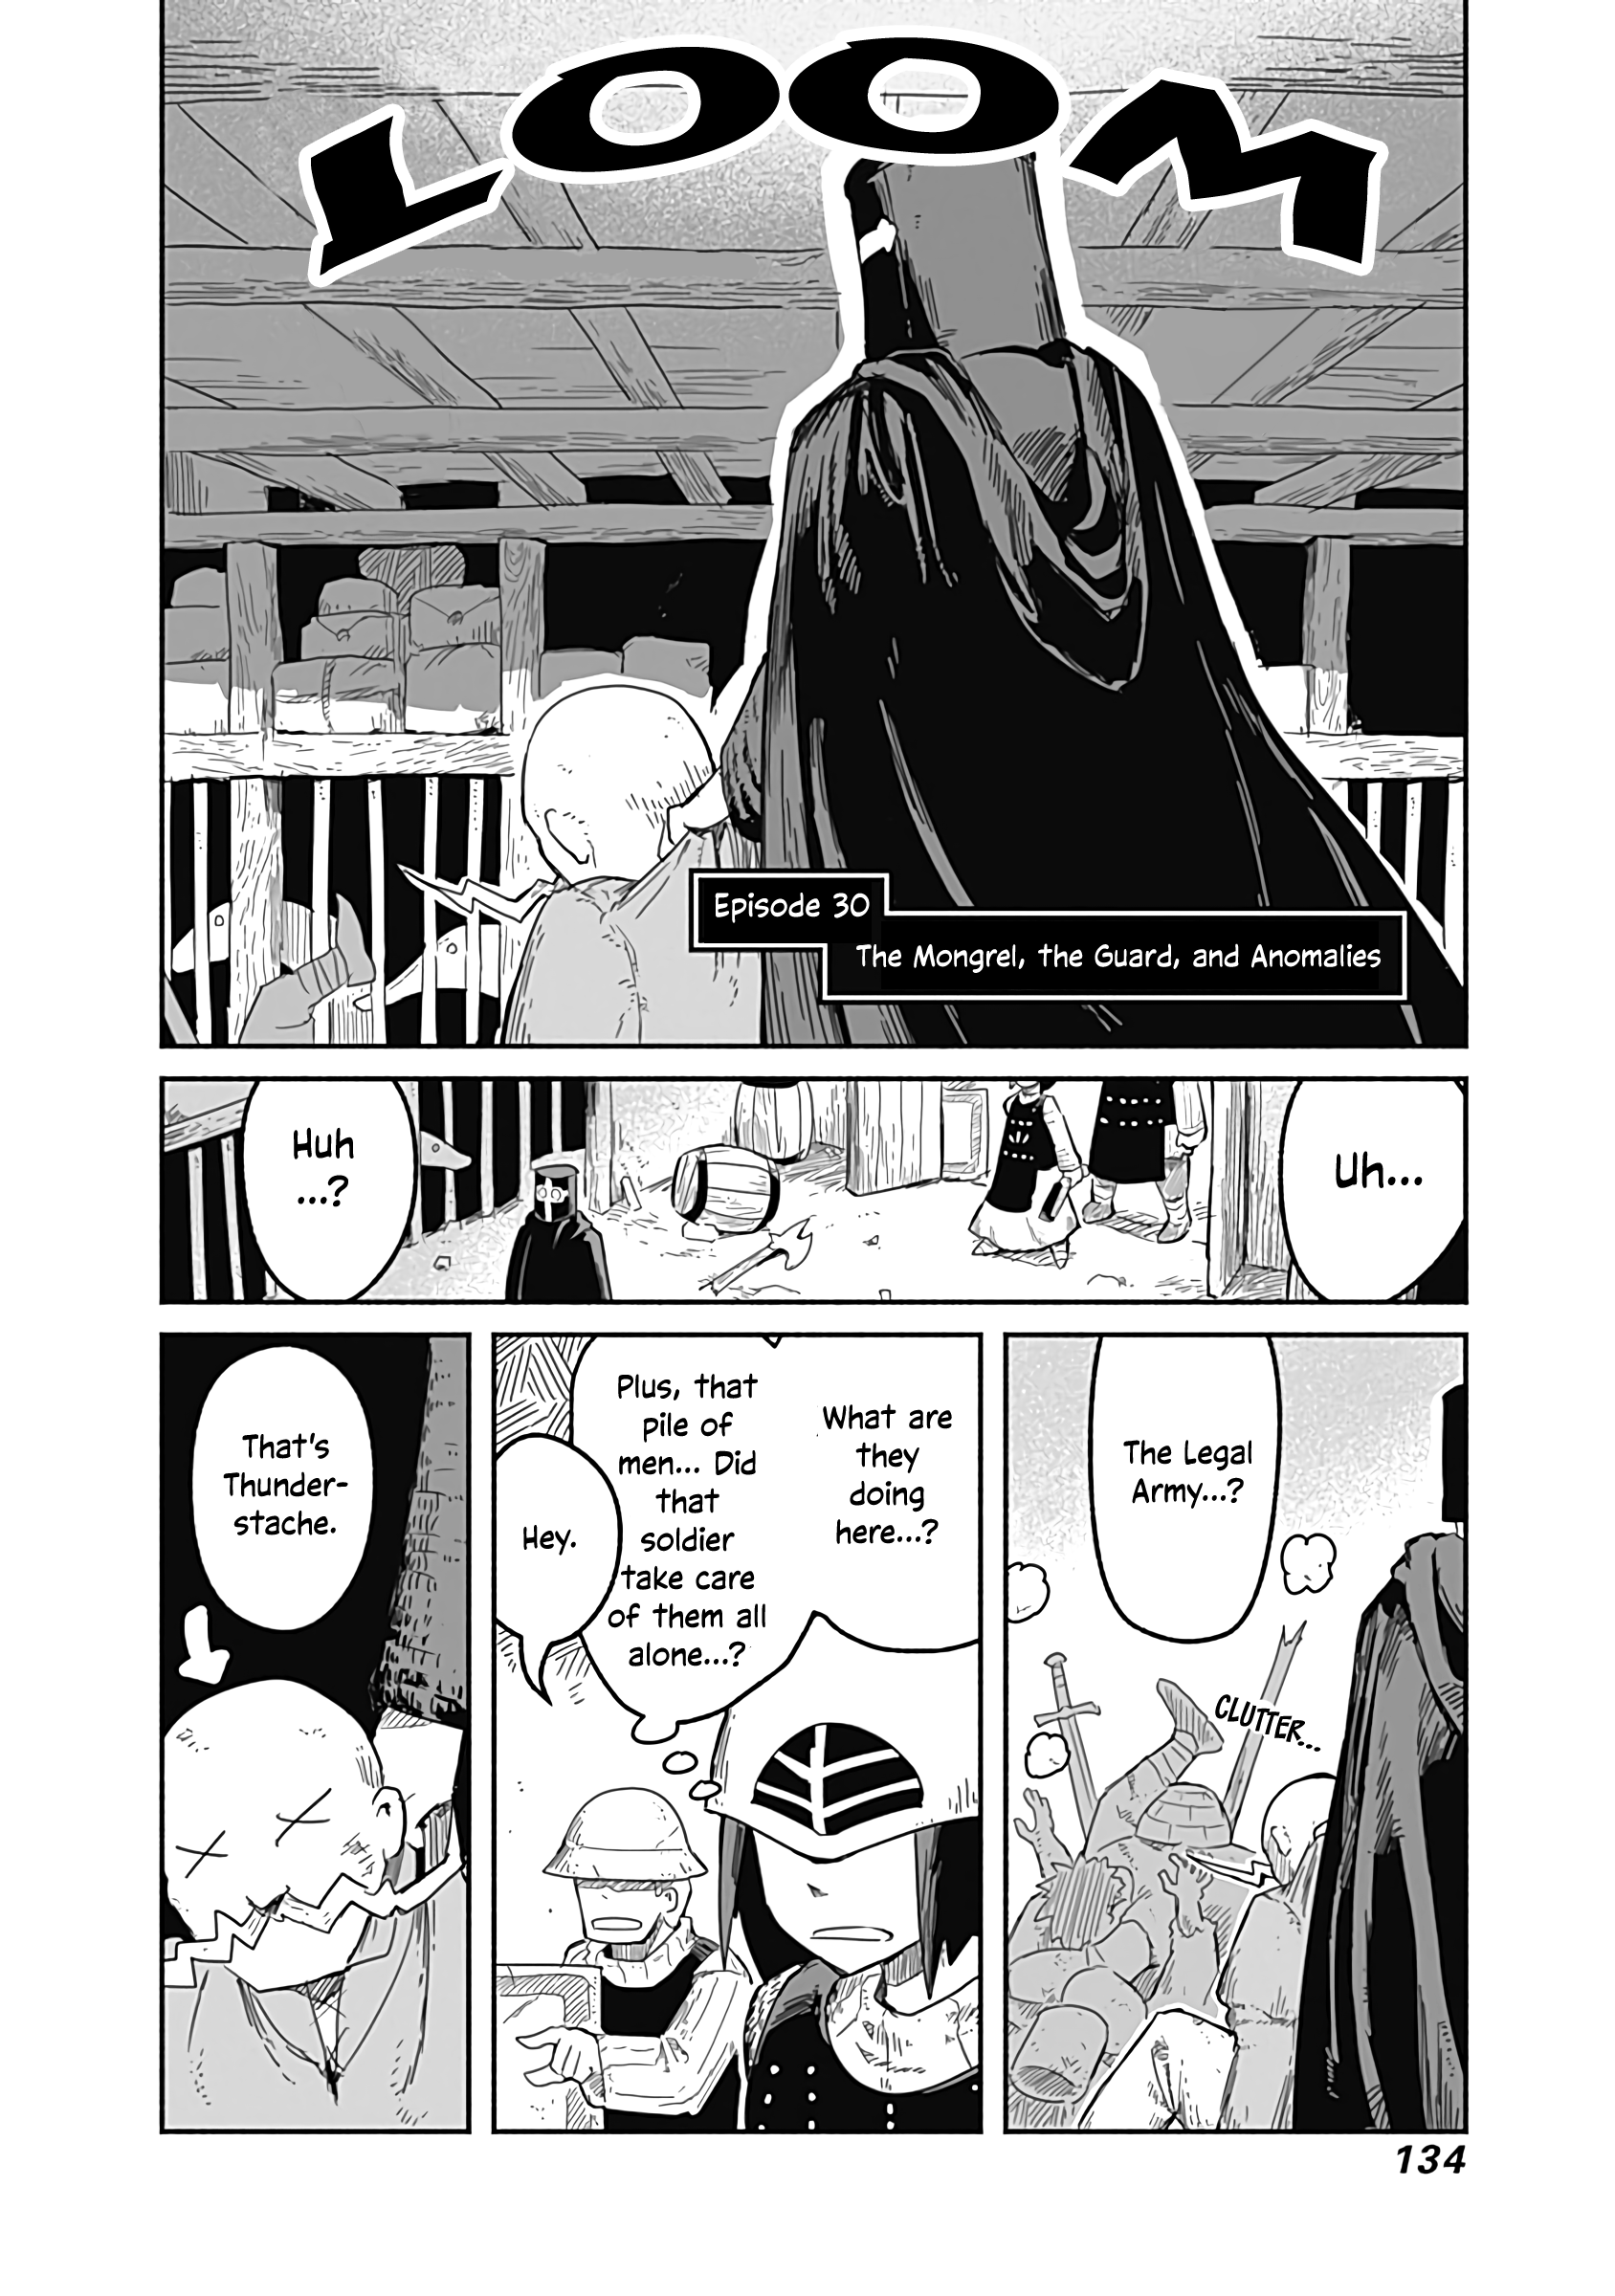 The Dragon, The Hero, And The Courier Vol.5 Chapter 30: The Mongrel, The Guard, And Anomalies - Picture 3